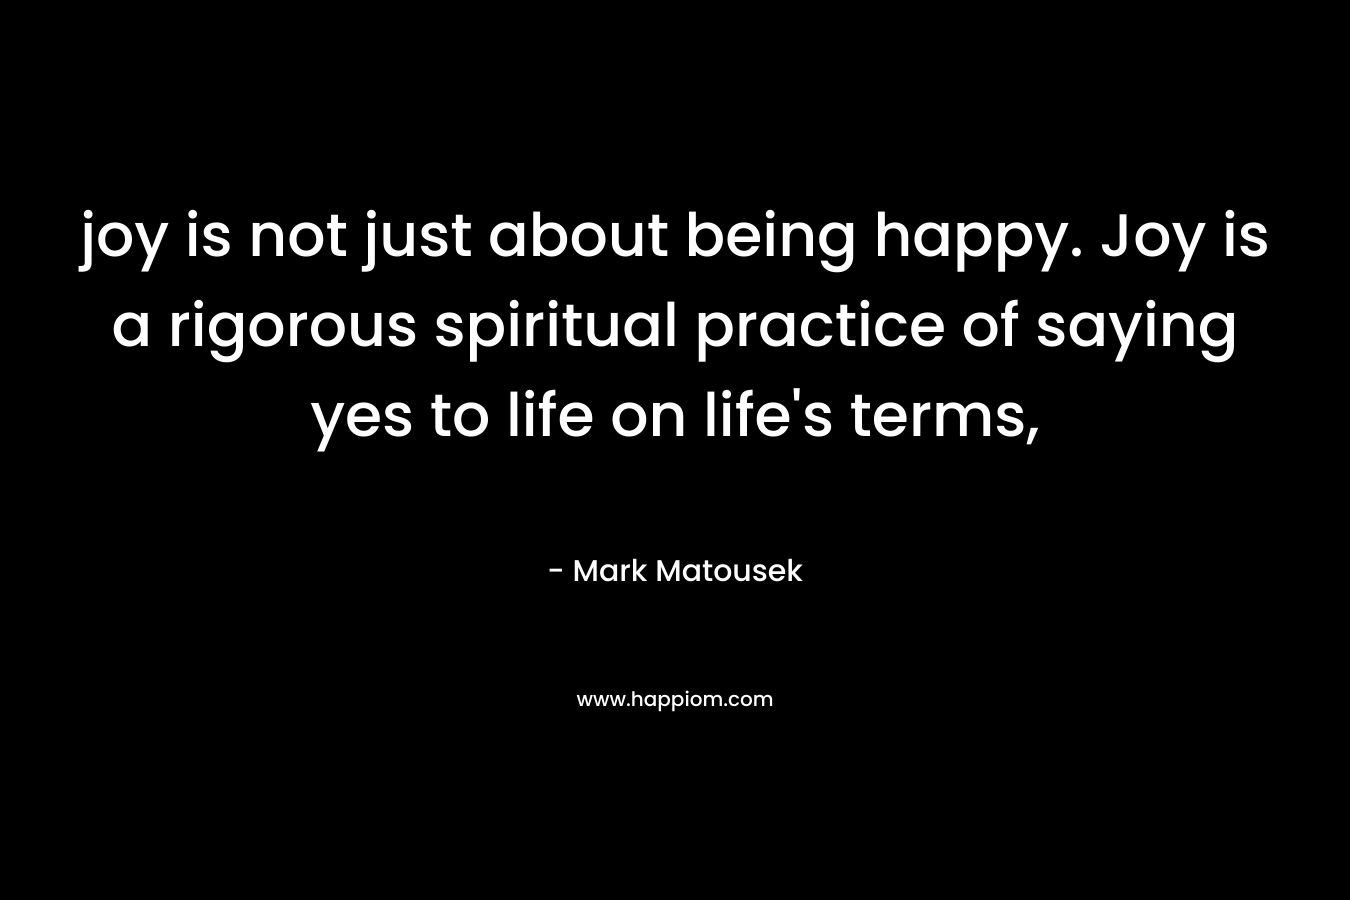 joy is not just about being happy. Joy is a rigorous spiritual practice of saying yes to life on life's terms,